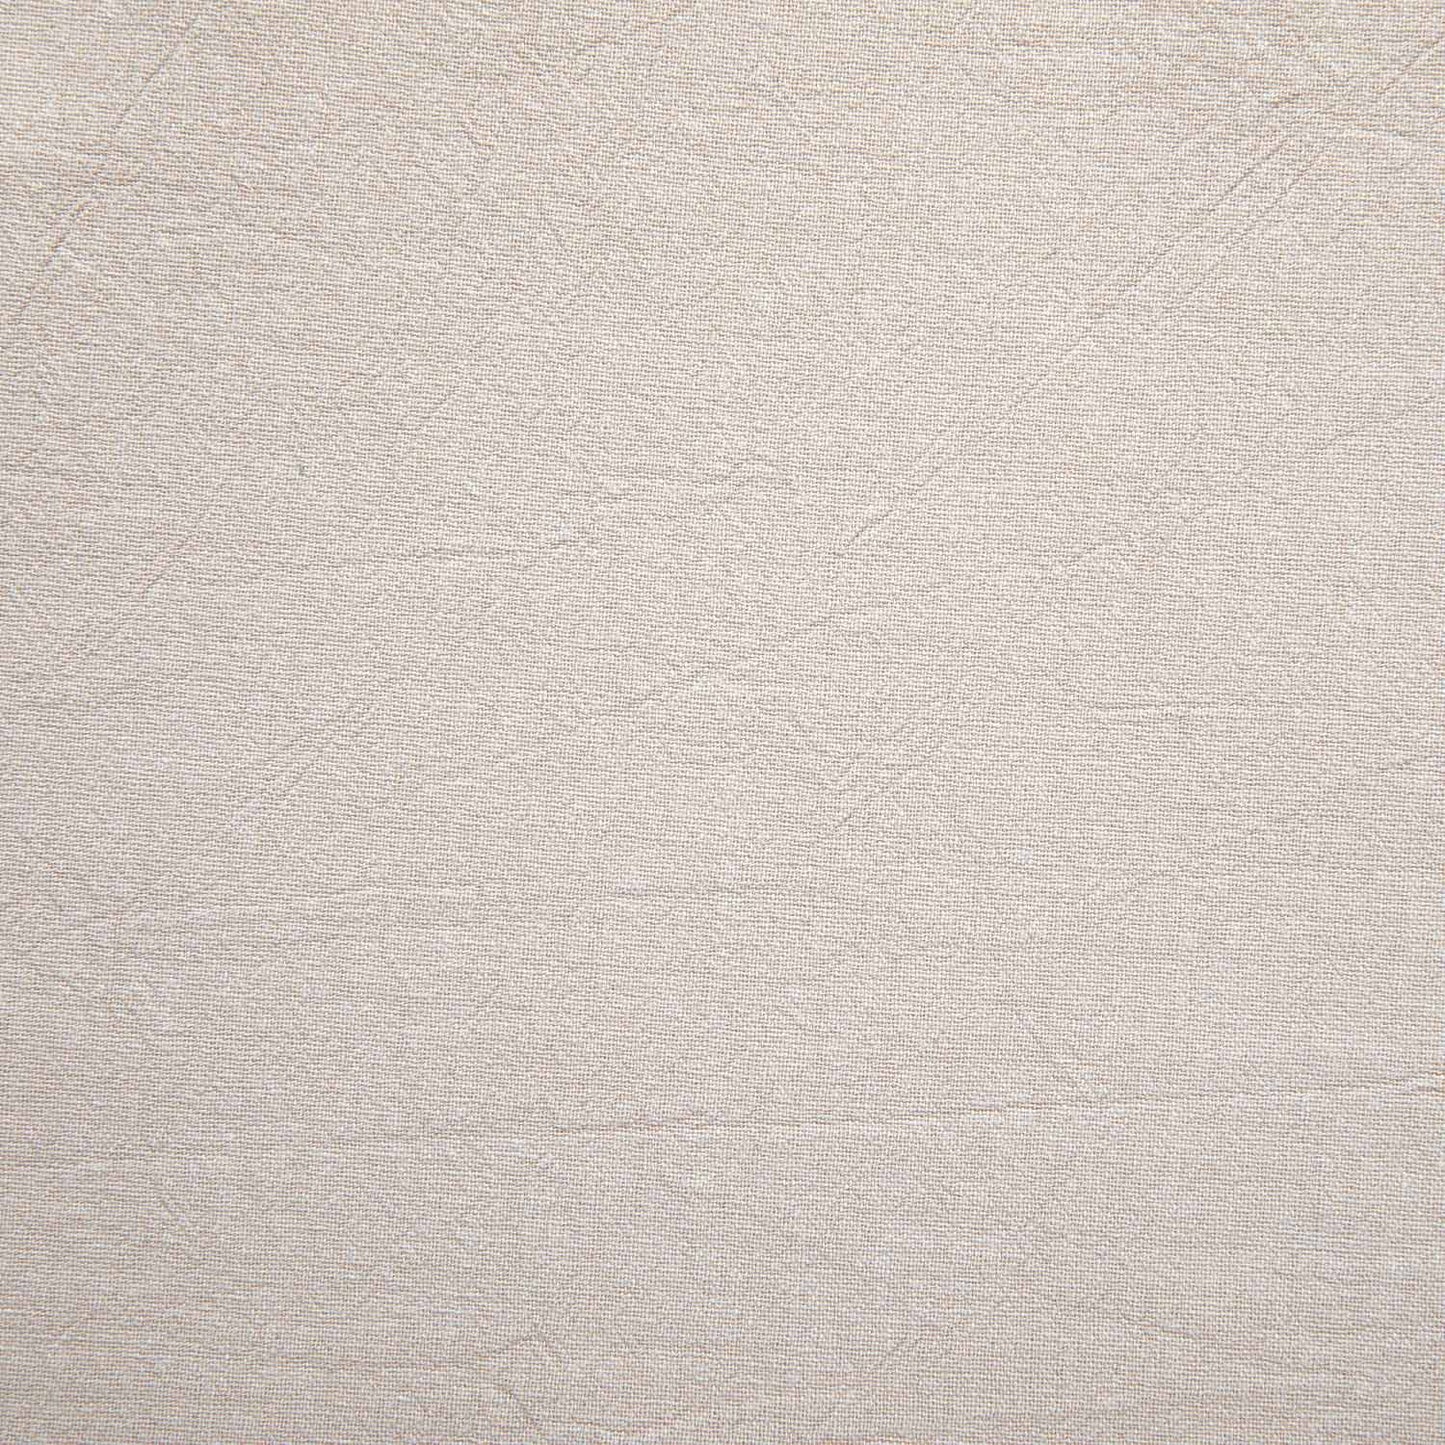 Rustic Cotton solid